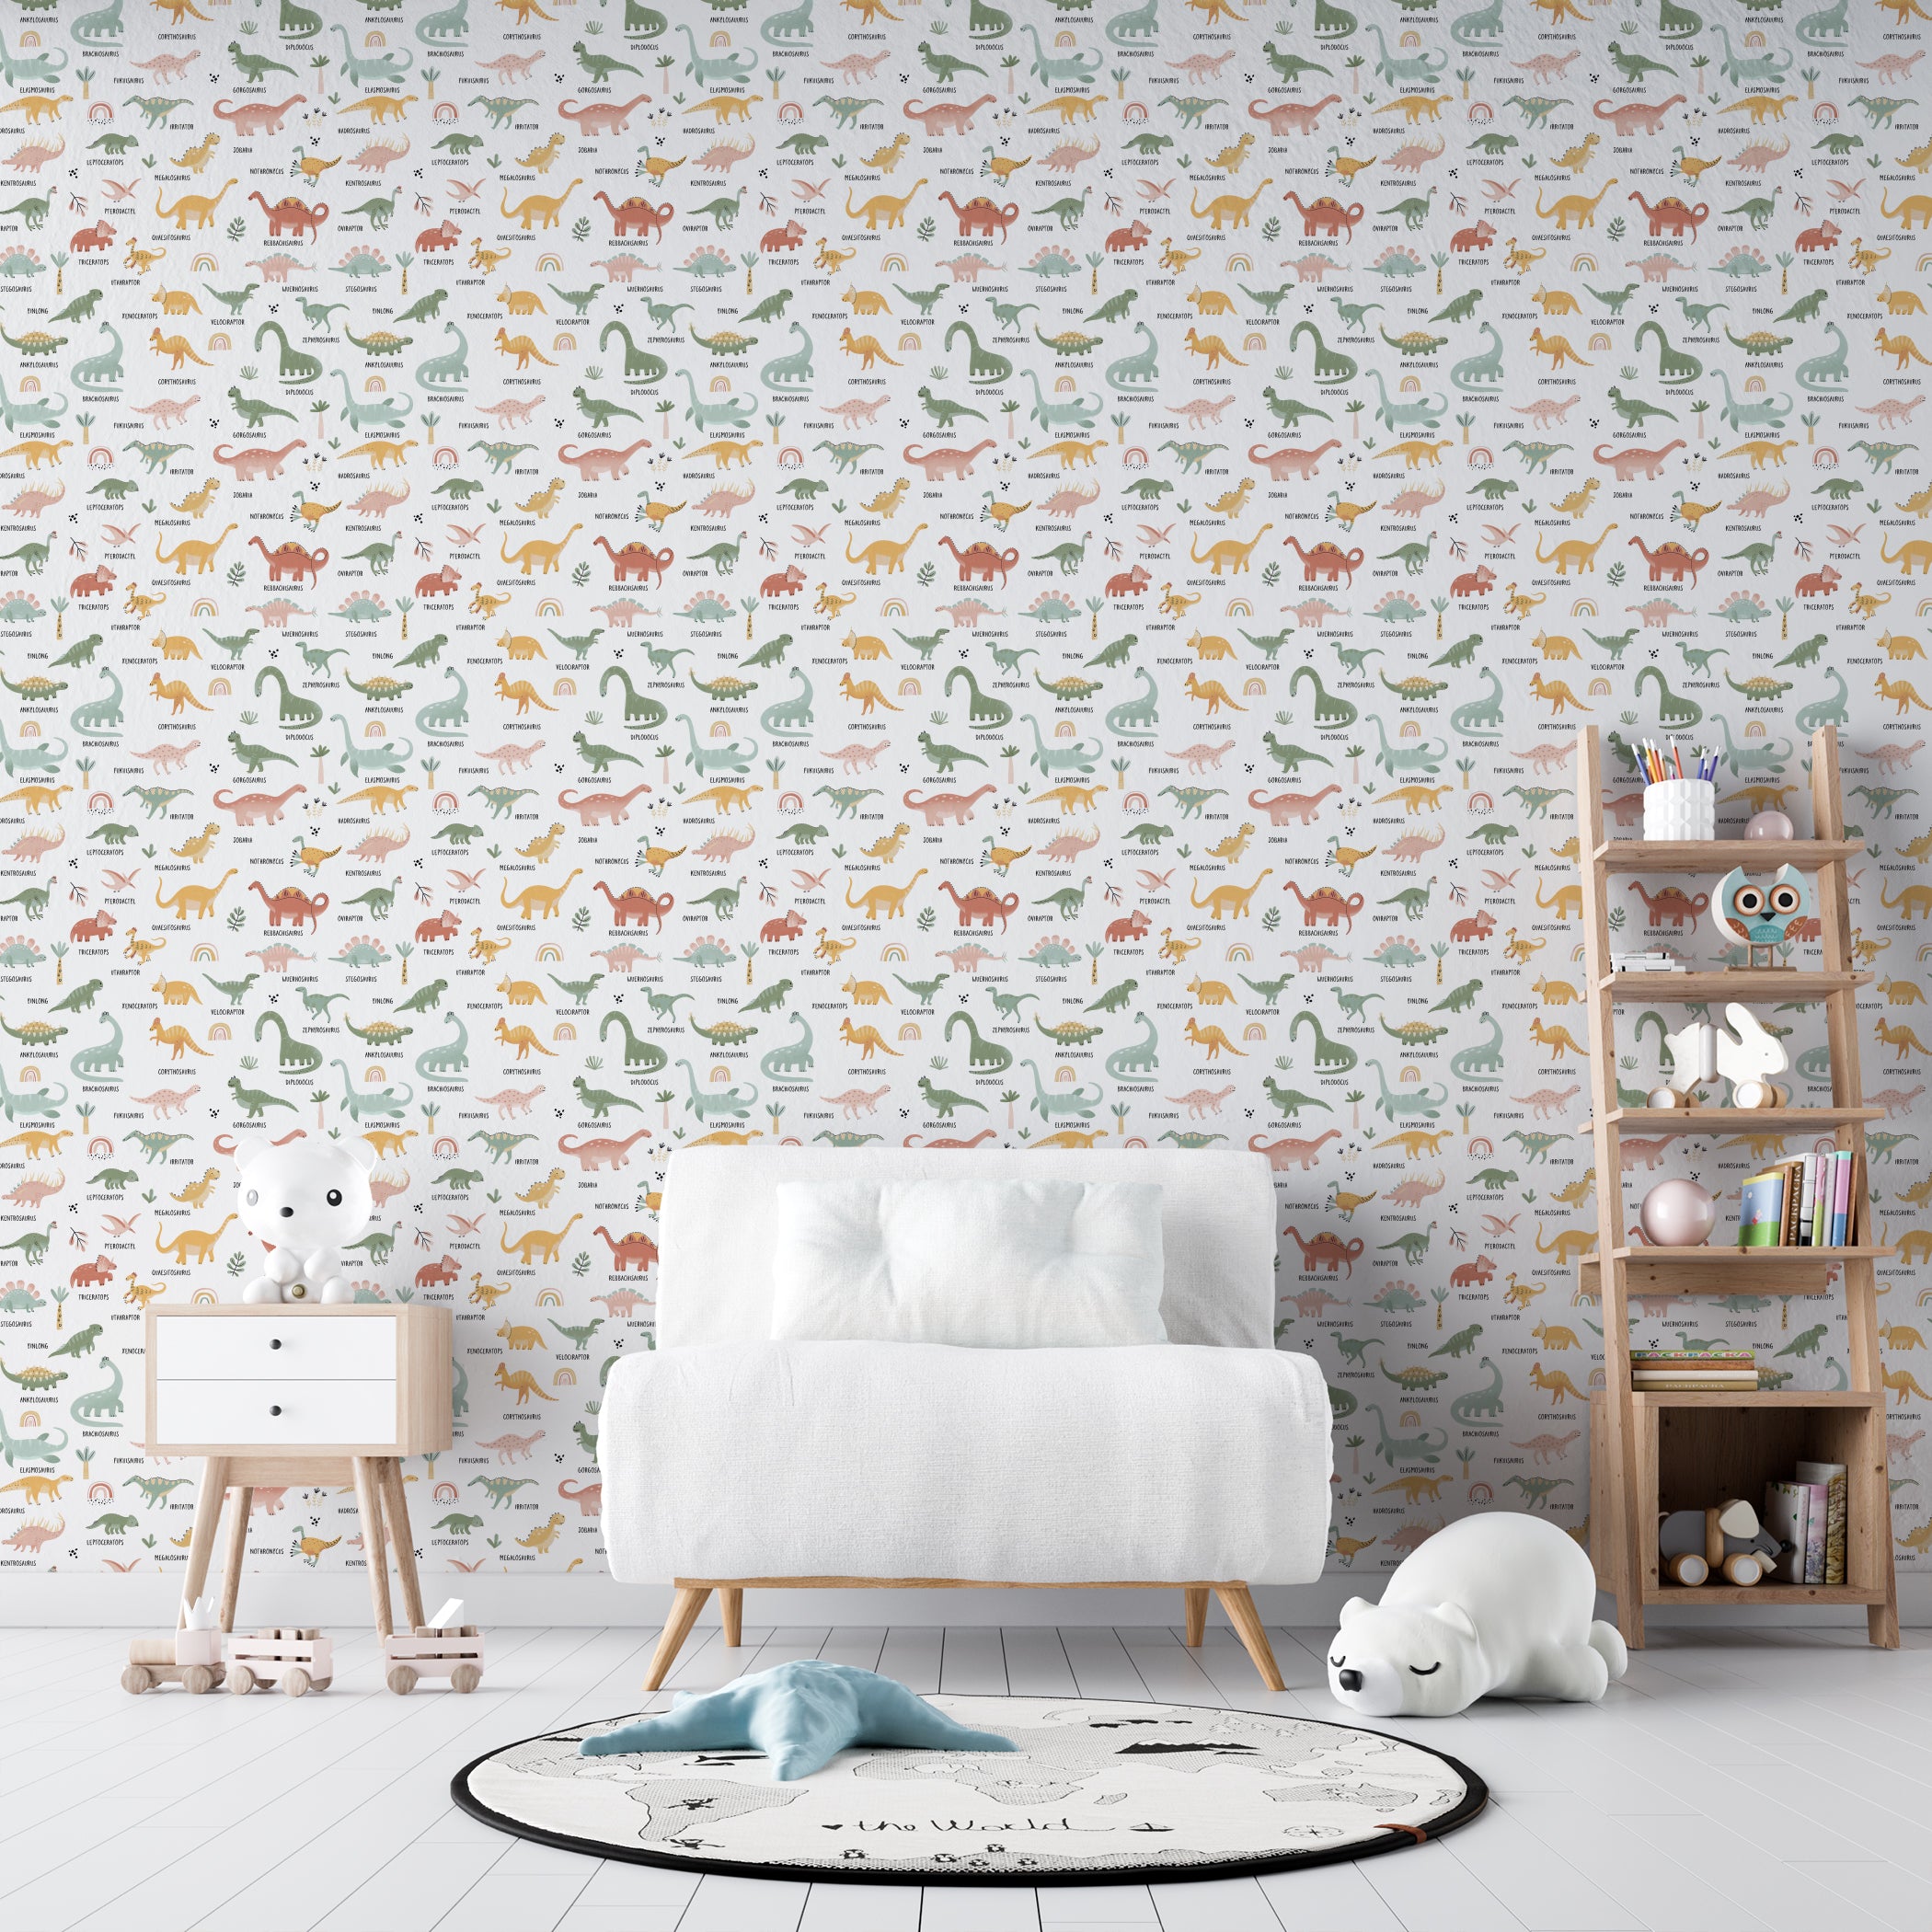 A child's room displaying the Dino World Kids Wallpaper II, which showcases a delightful array of labeled dinosaurs in muted pastels on a white backdrop adorned with green plant motifs. The setting includes a modern white chair and a wooden toy cabinet.